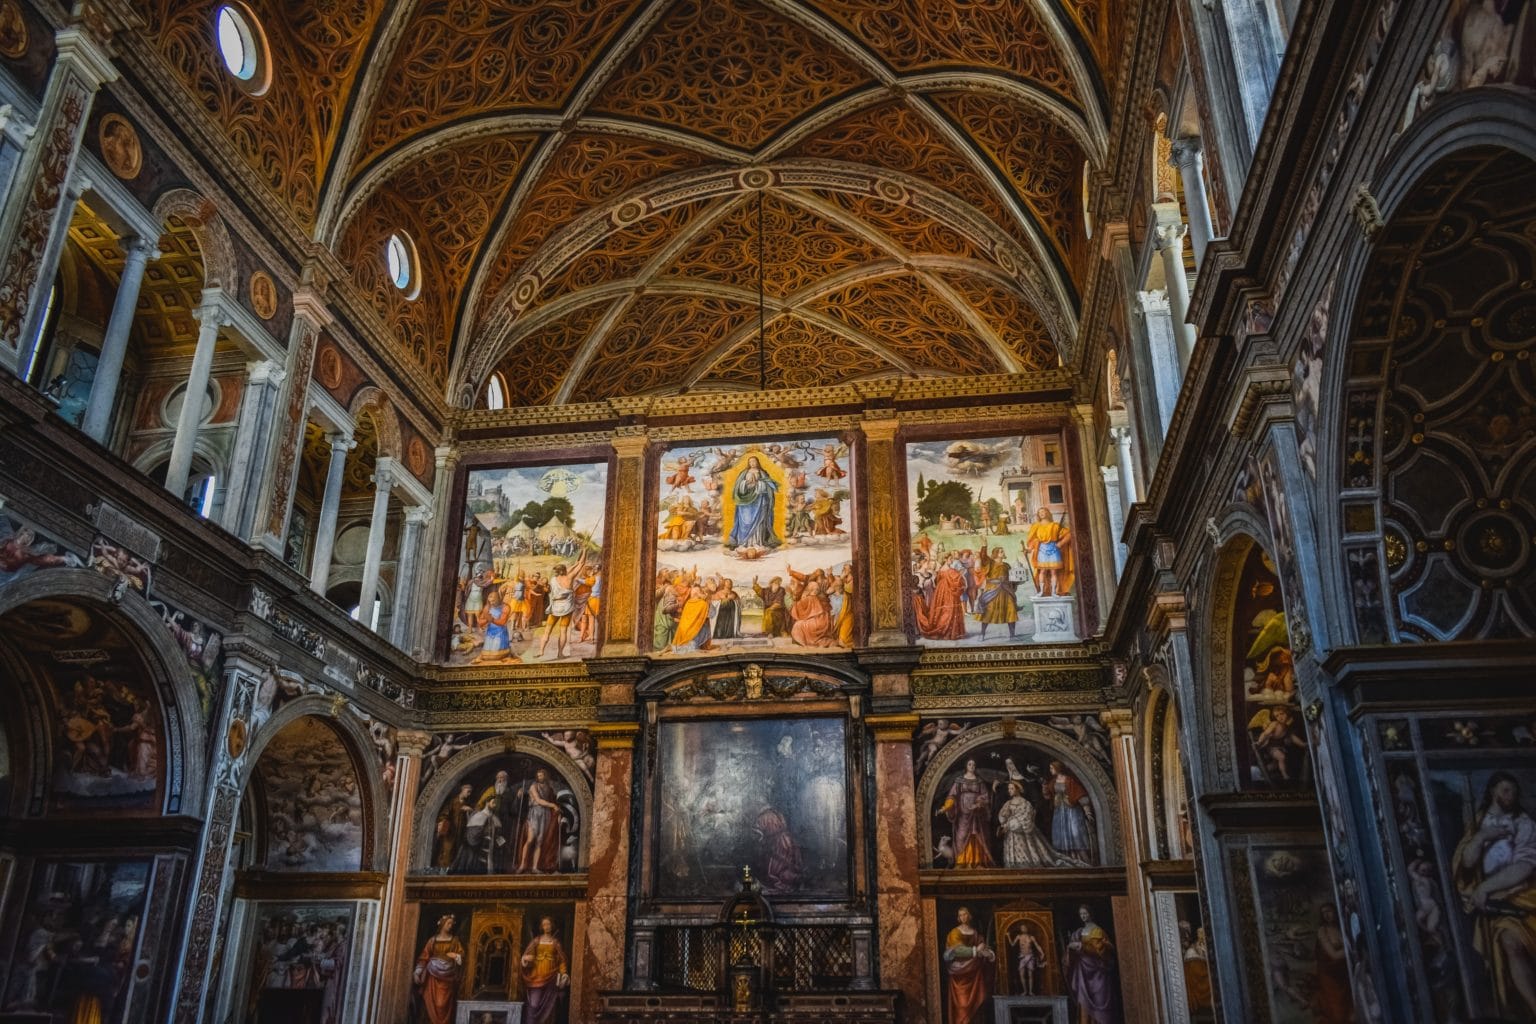 The 10 best places to discover art in Italy